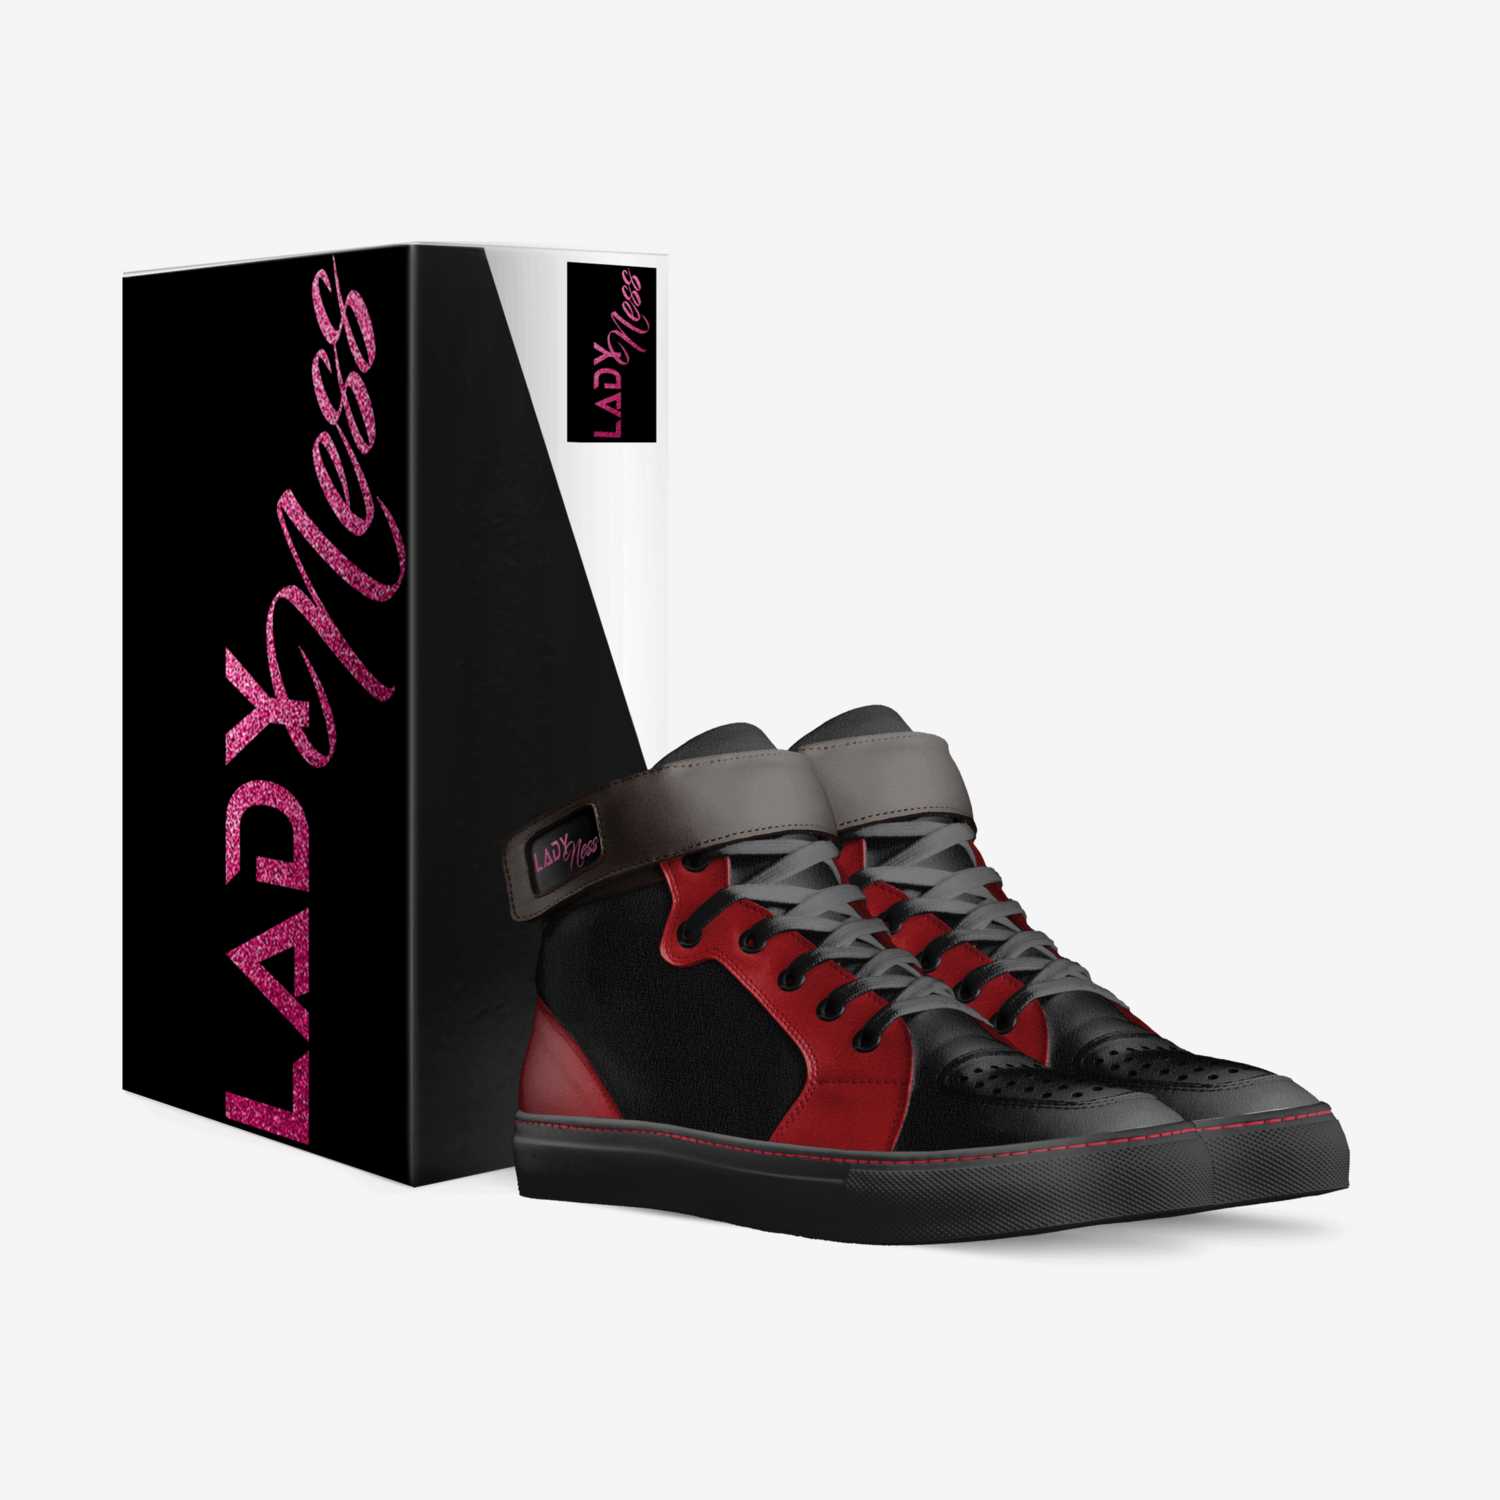 LadyNess custom made in Italy shoes by Lady Ness | Box view